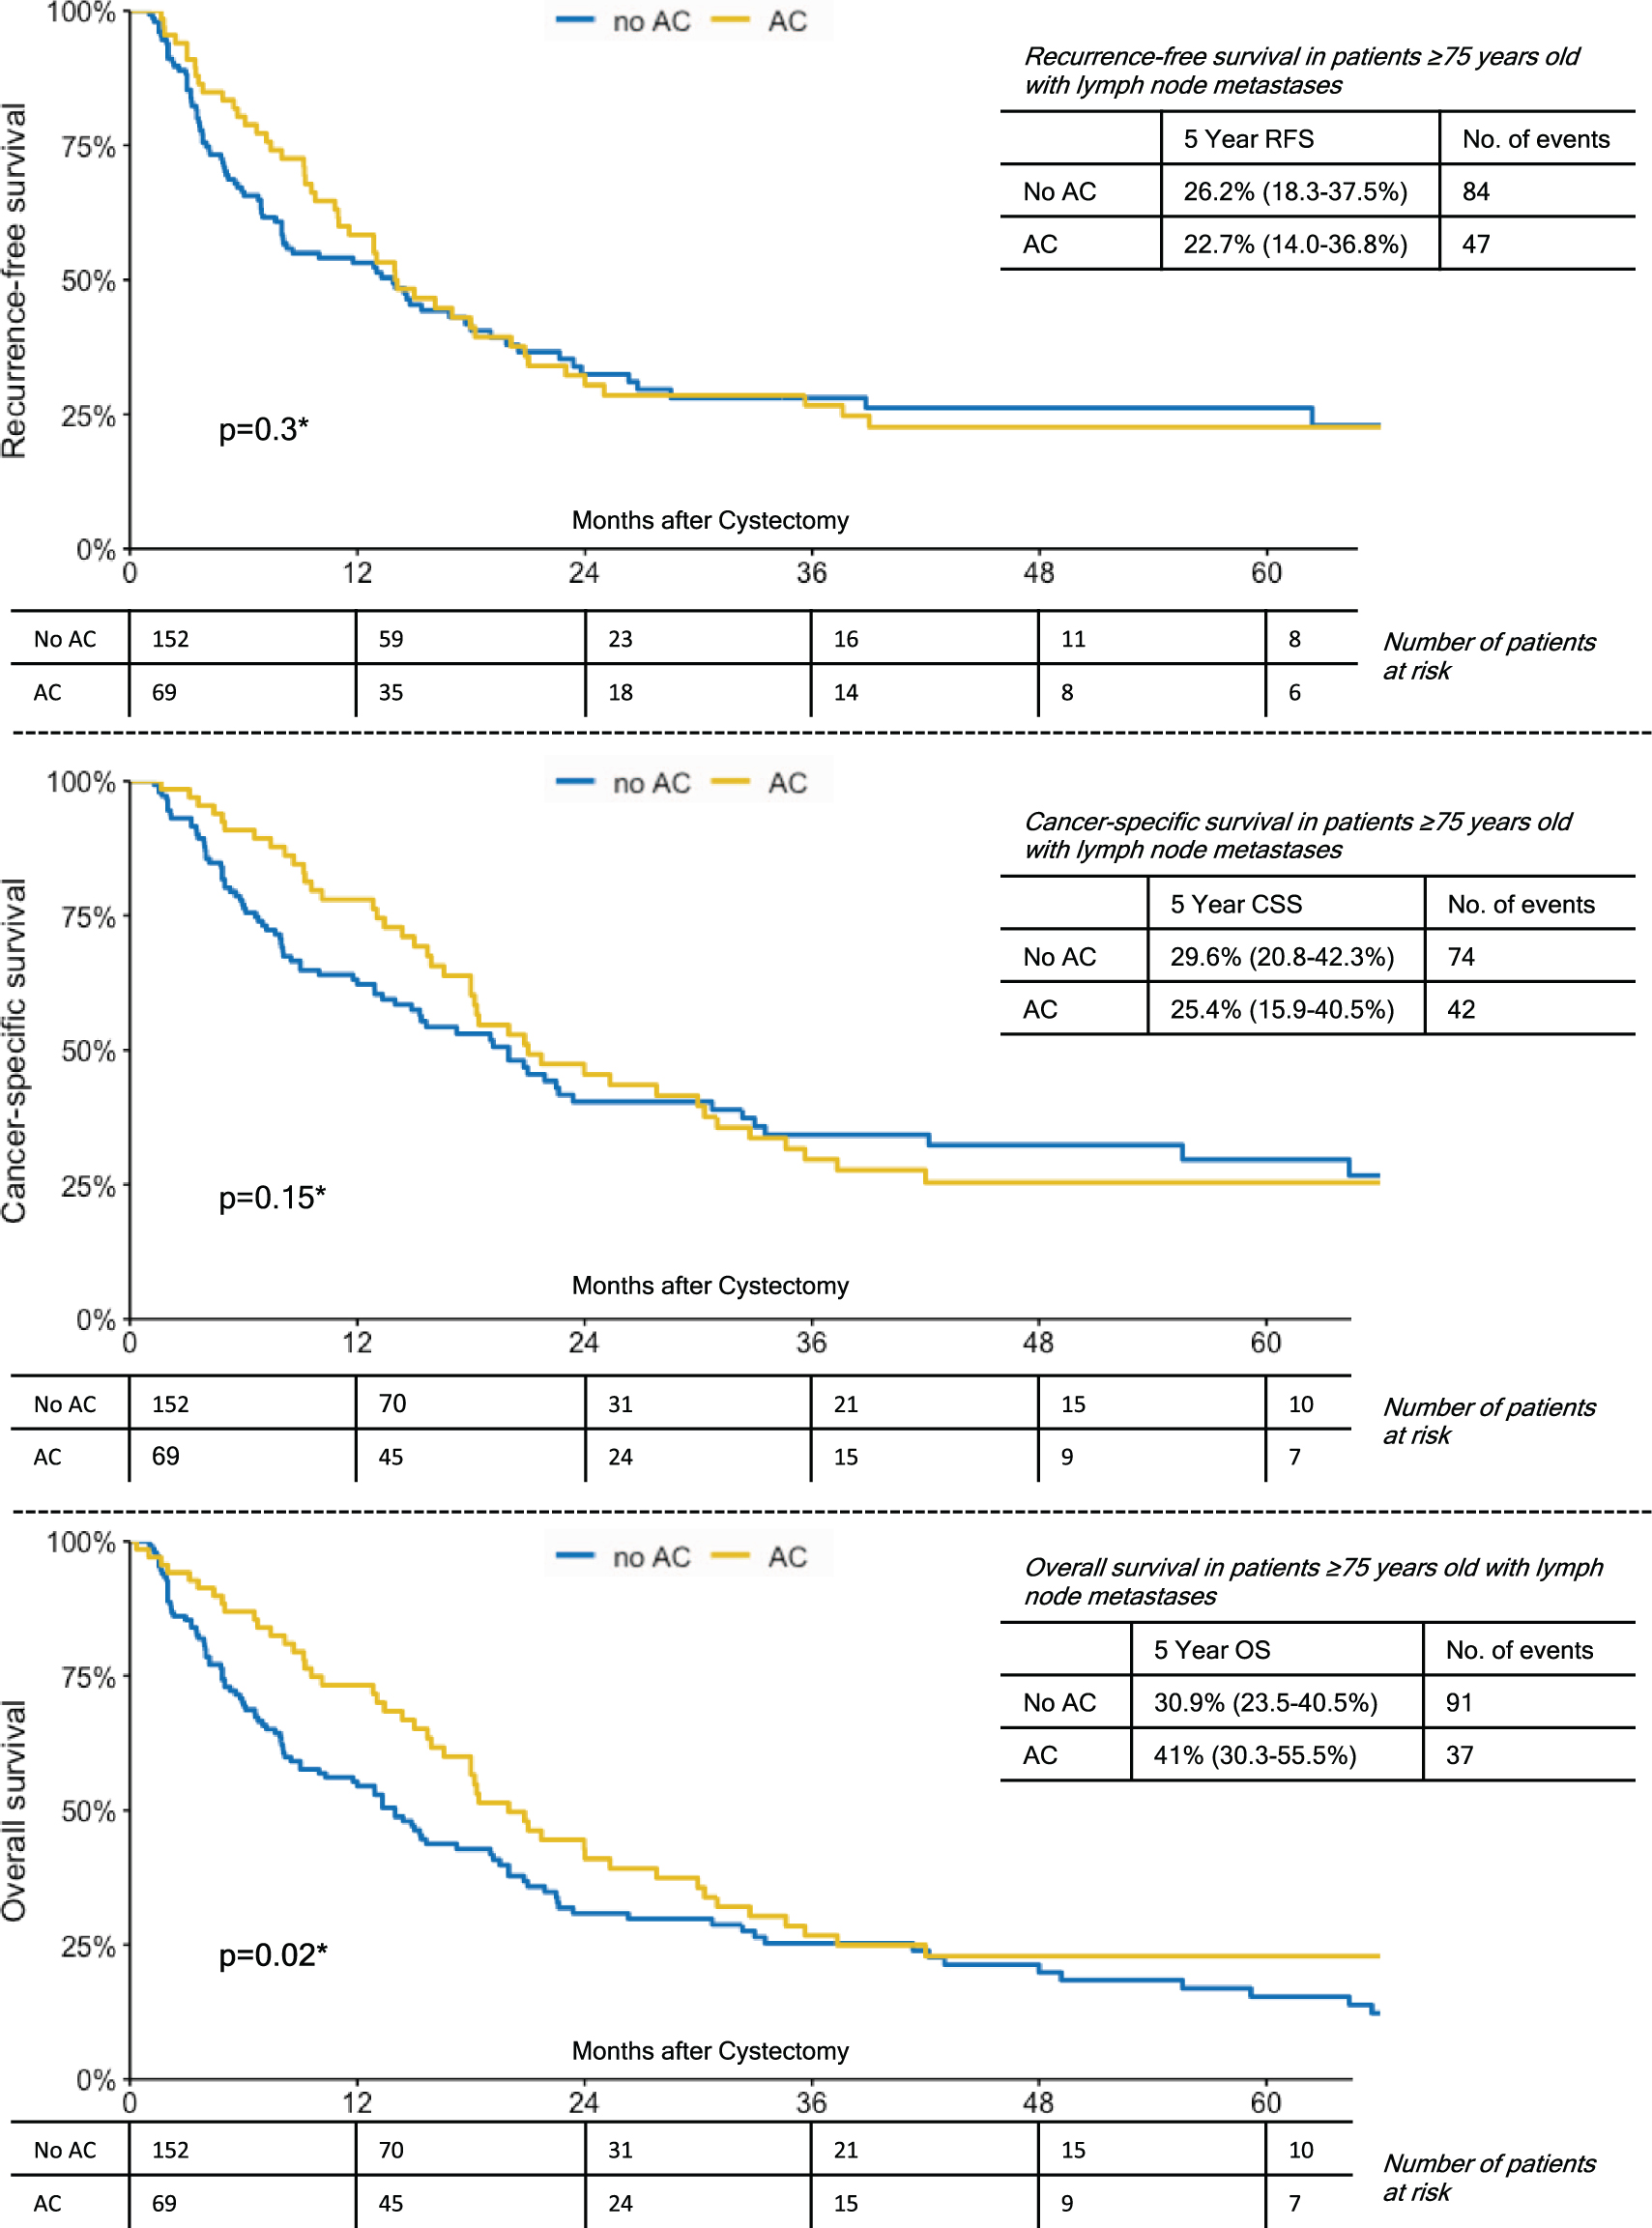 Kaplan-Meier Curves Demonstrating The Effect of Adjuvant Chemotherapy on Recurrence-Free Survival; Cancer-Specific Survival and Overall Survival in Patients ≥75 Years Old with Lymph Node Metastases.